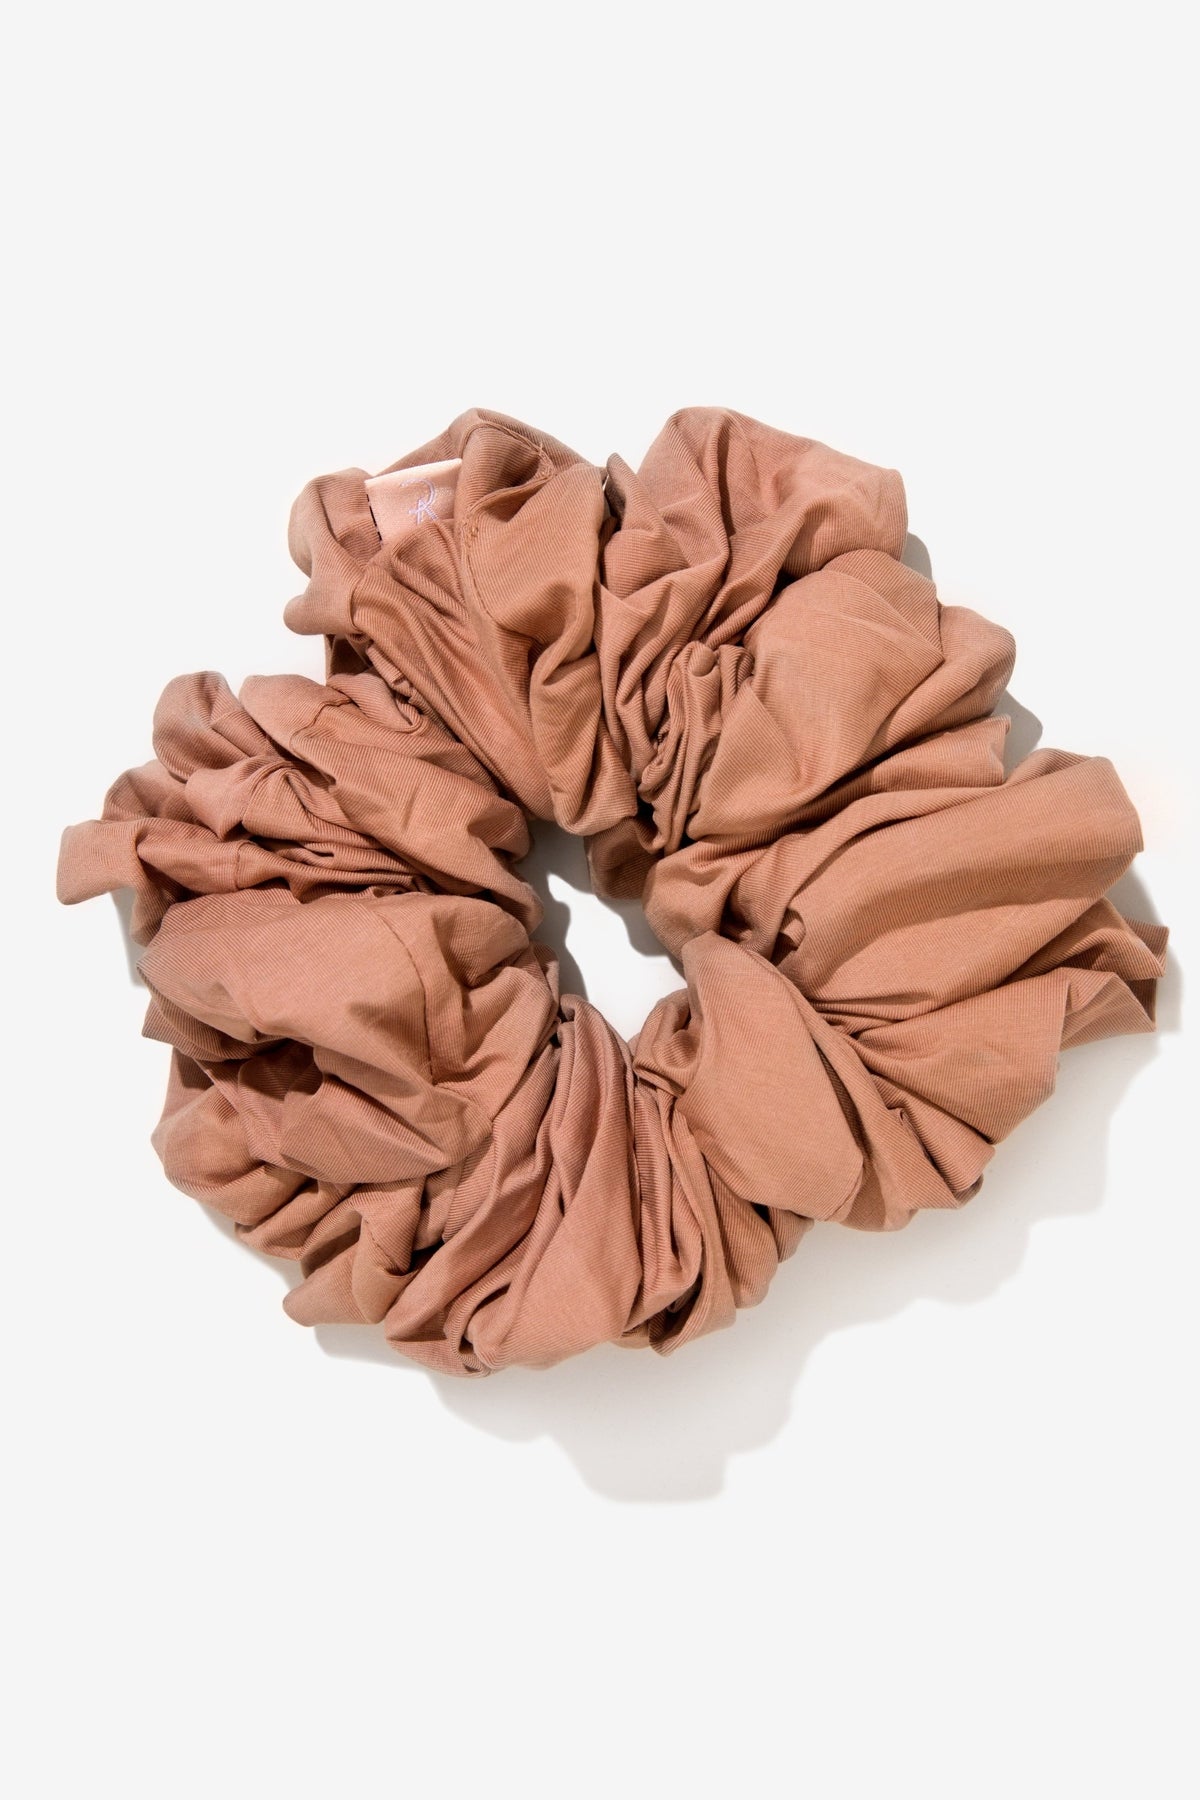 Cotton Volume Scrunchie - Natural Veiled Collection 